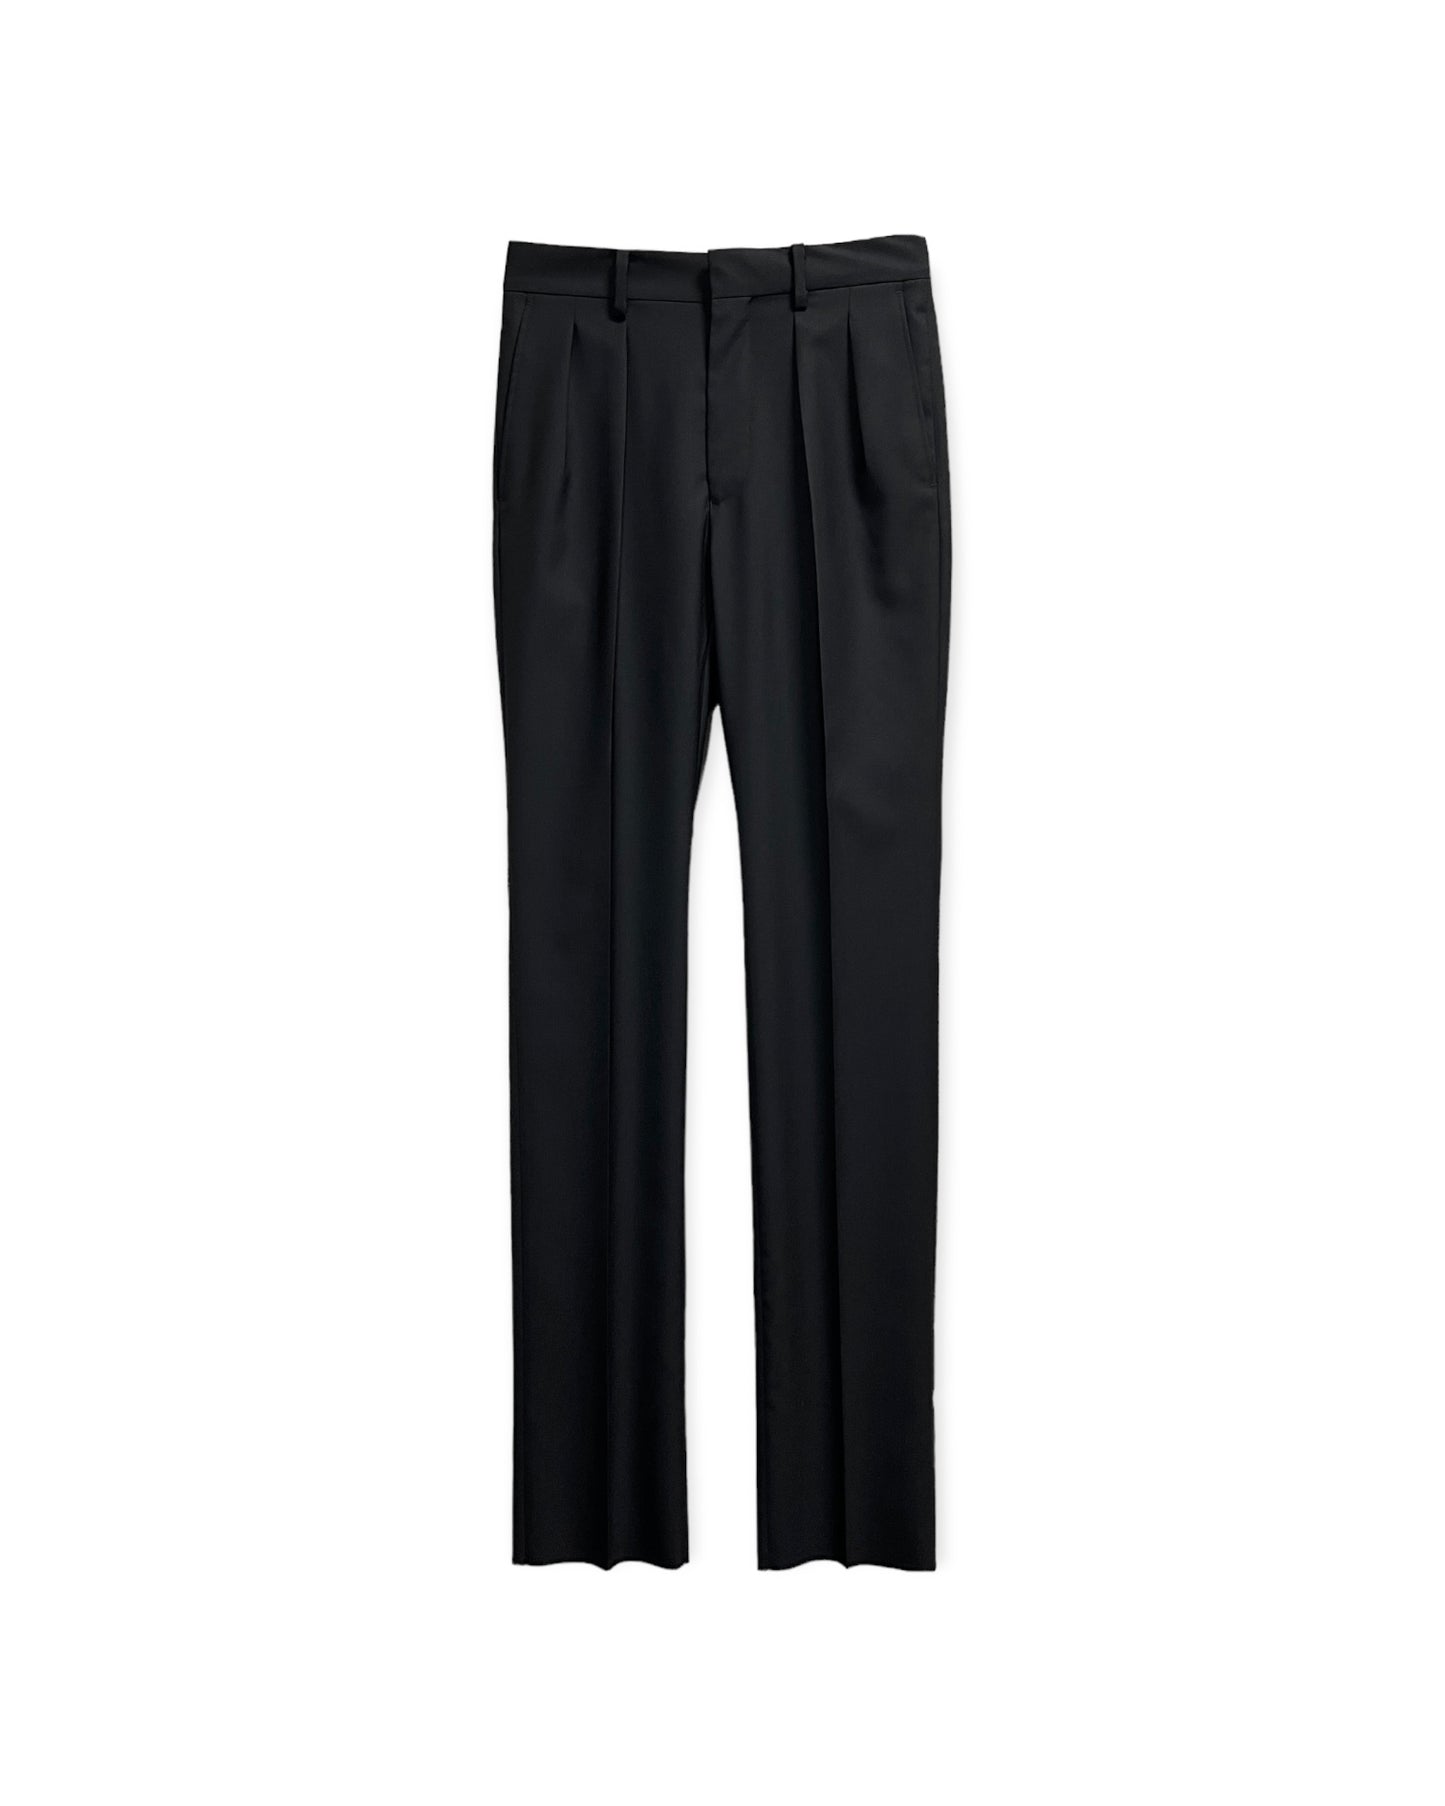 DOUBLE PLEATED COMBAT TROUSER